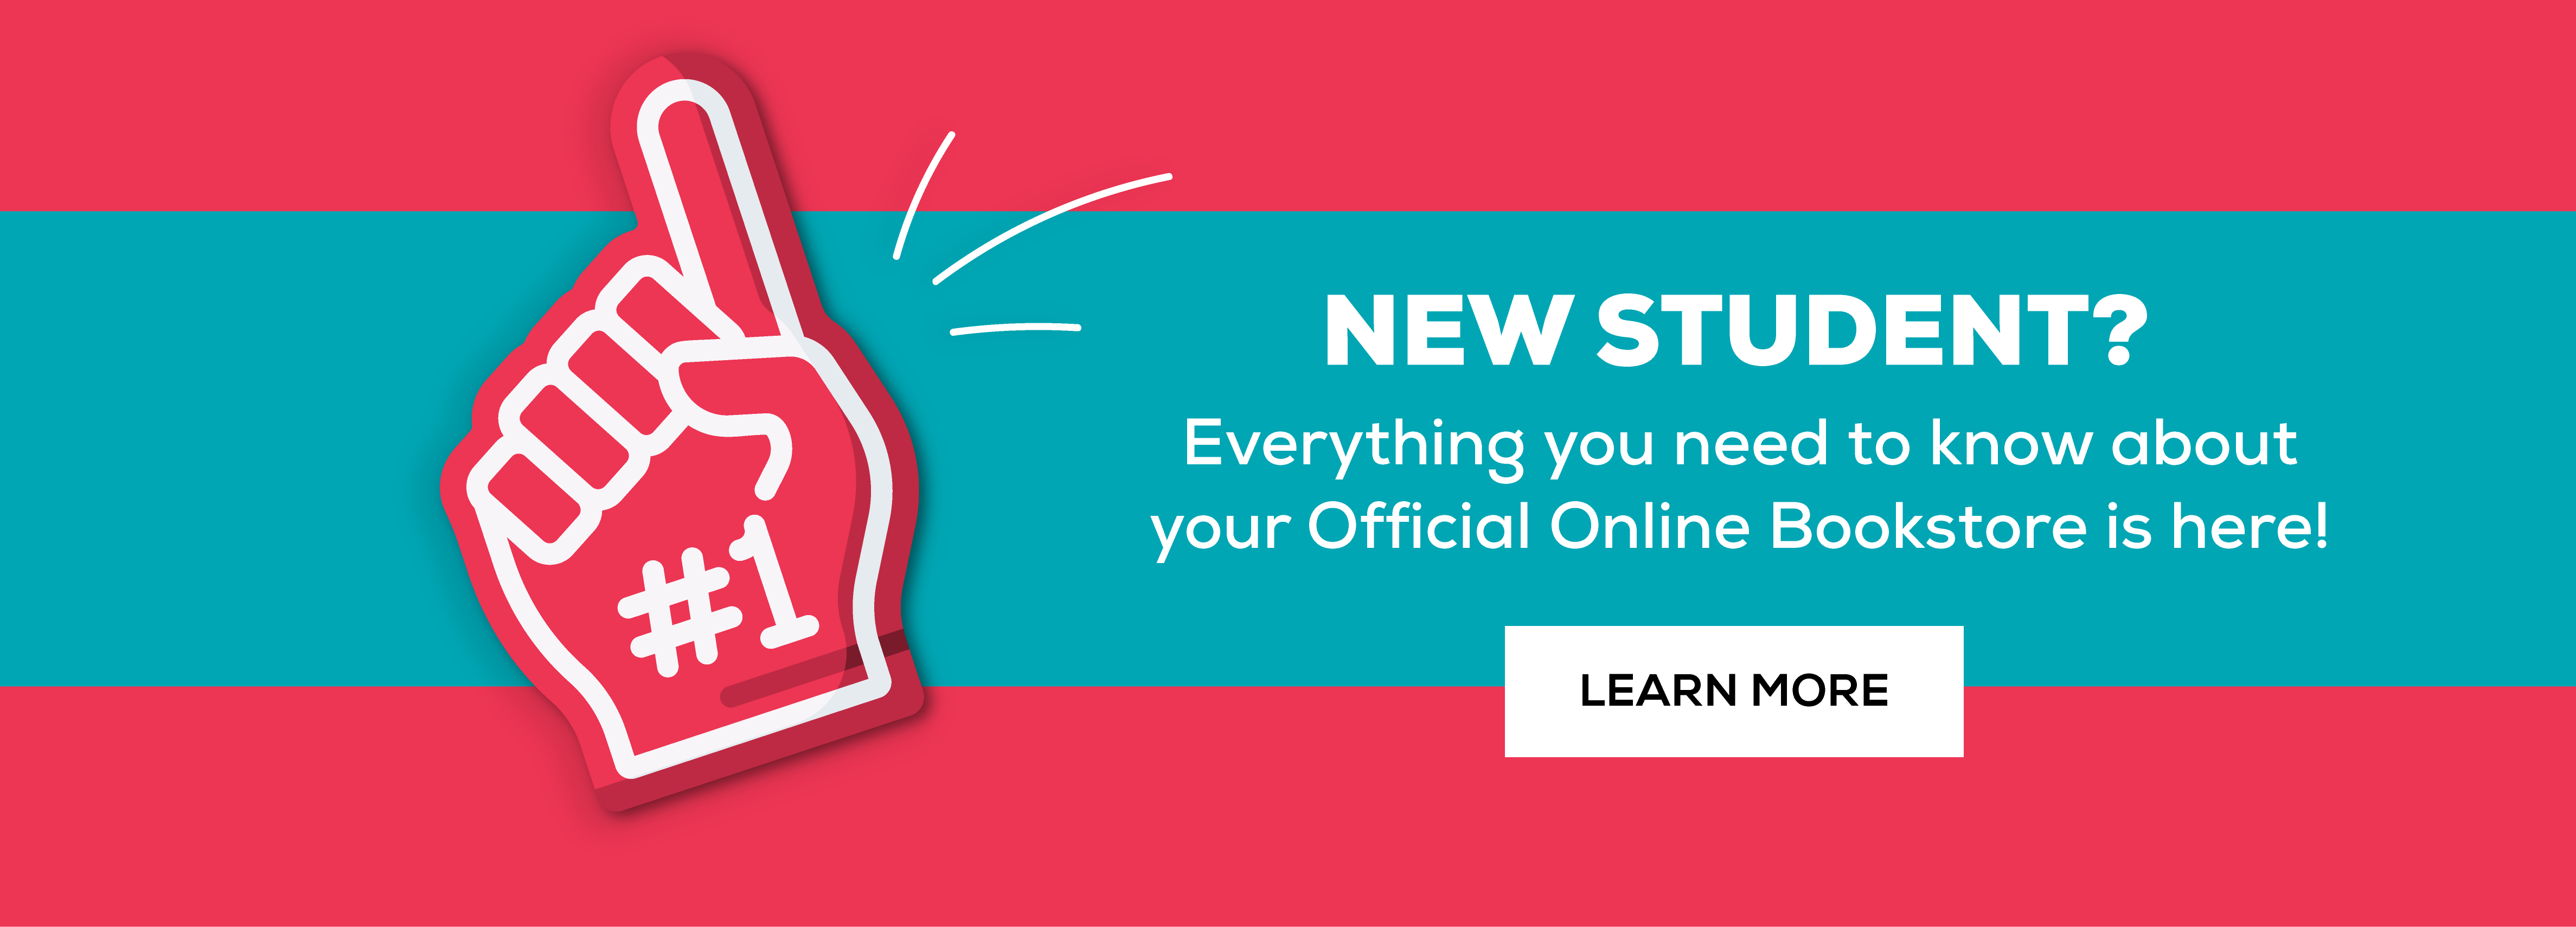 New Student? Everything you need to know about your Official Online bookstore is here!